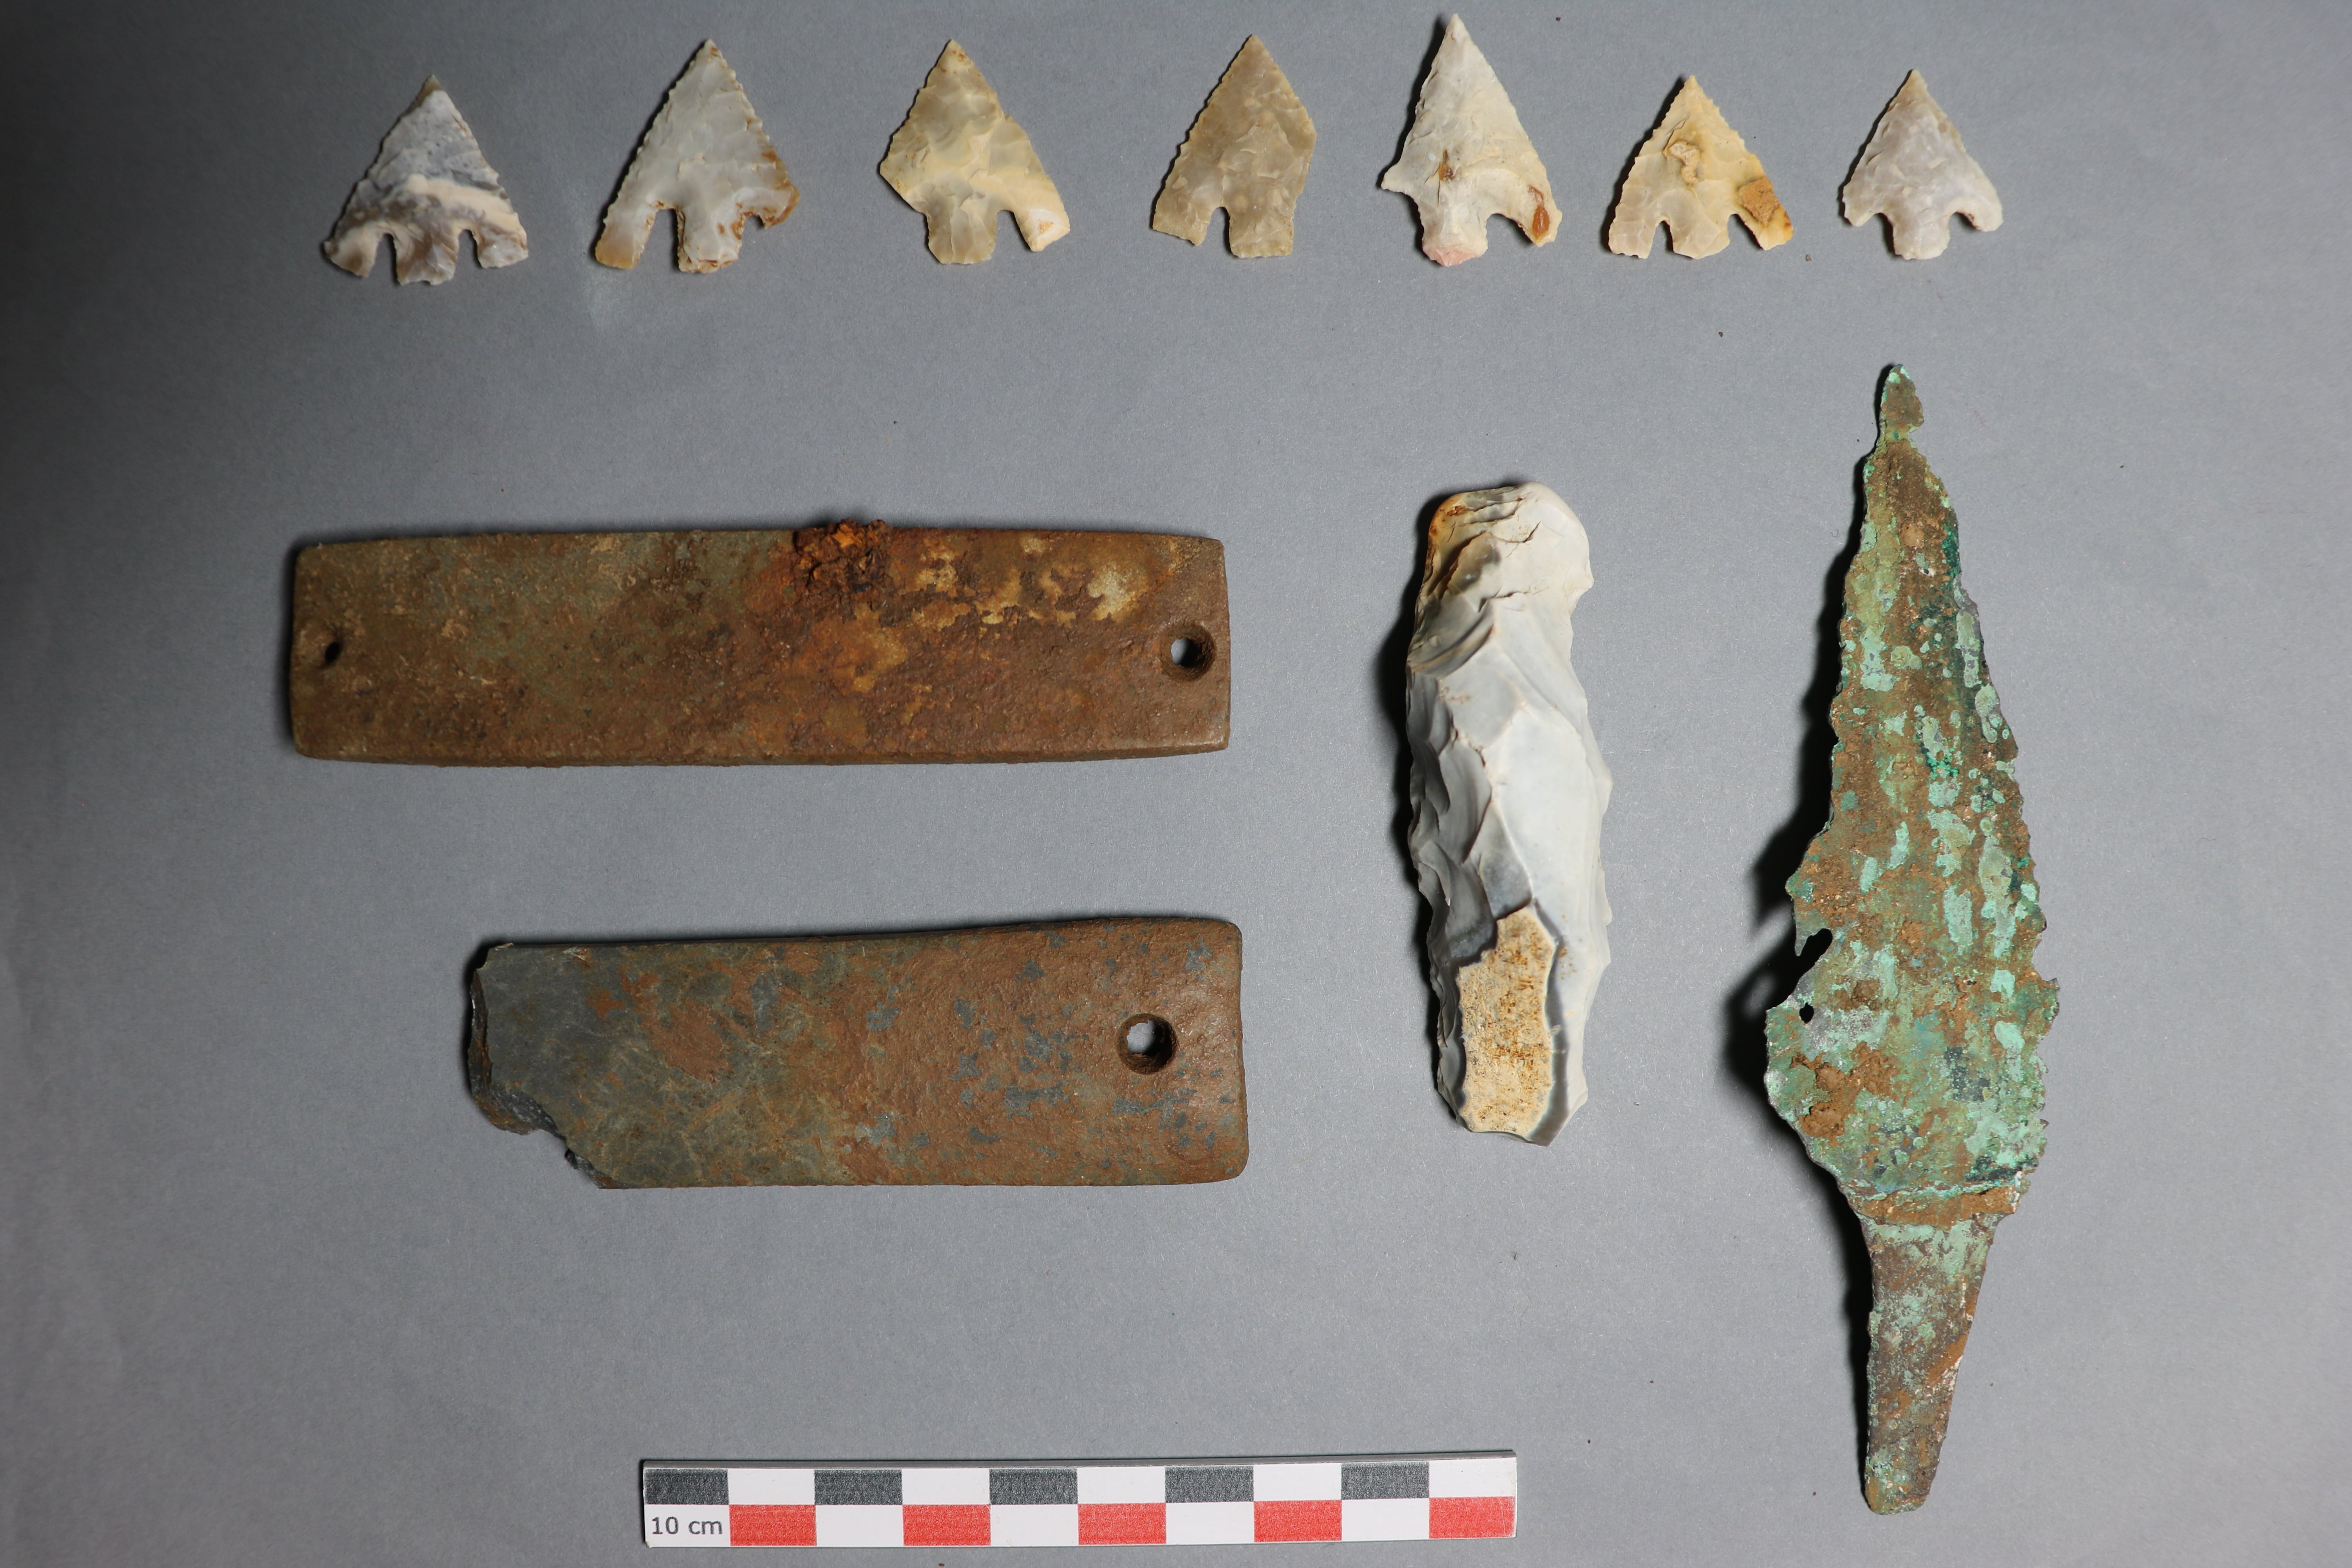 seven flint arrowheads laid out above two archer's braces, a flint lighter, and a copper alloy dagger on a grey table